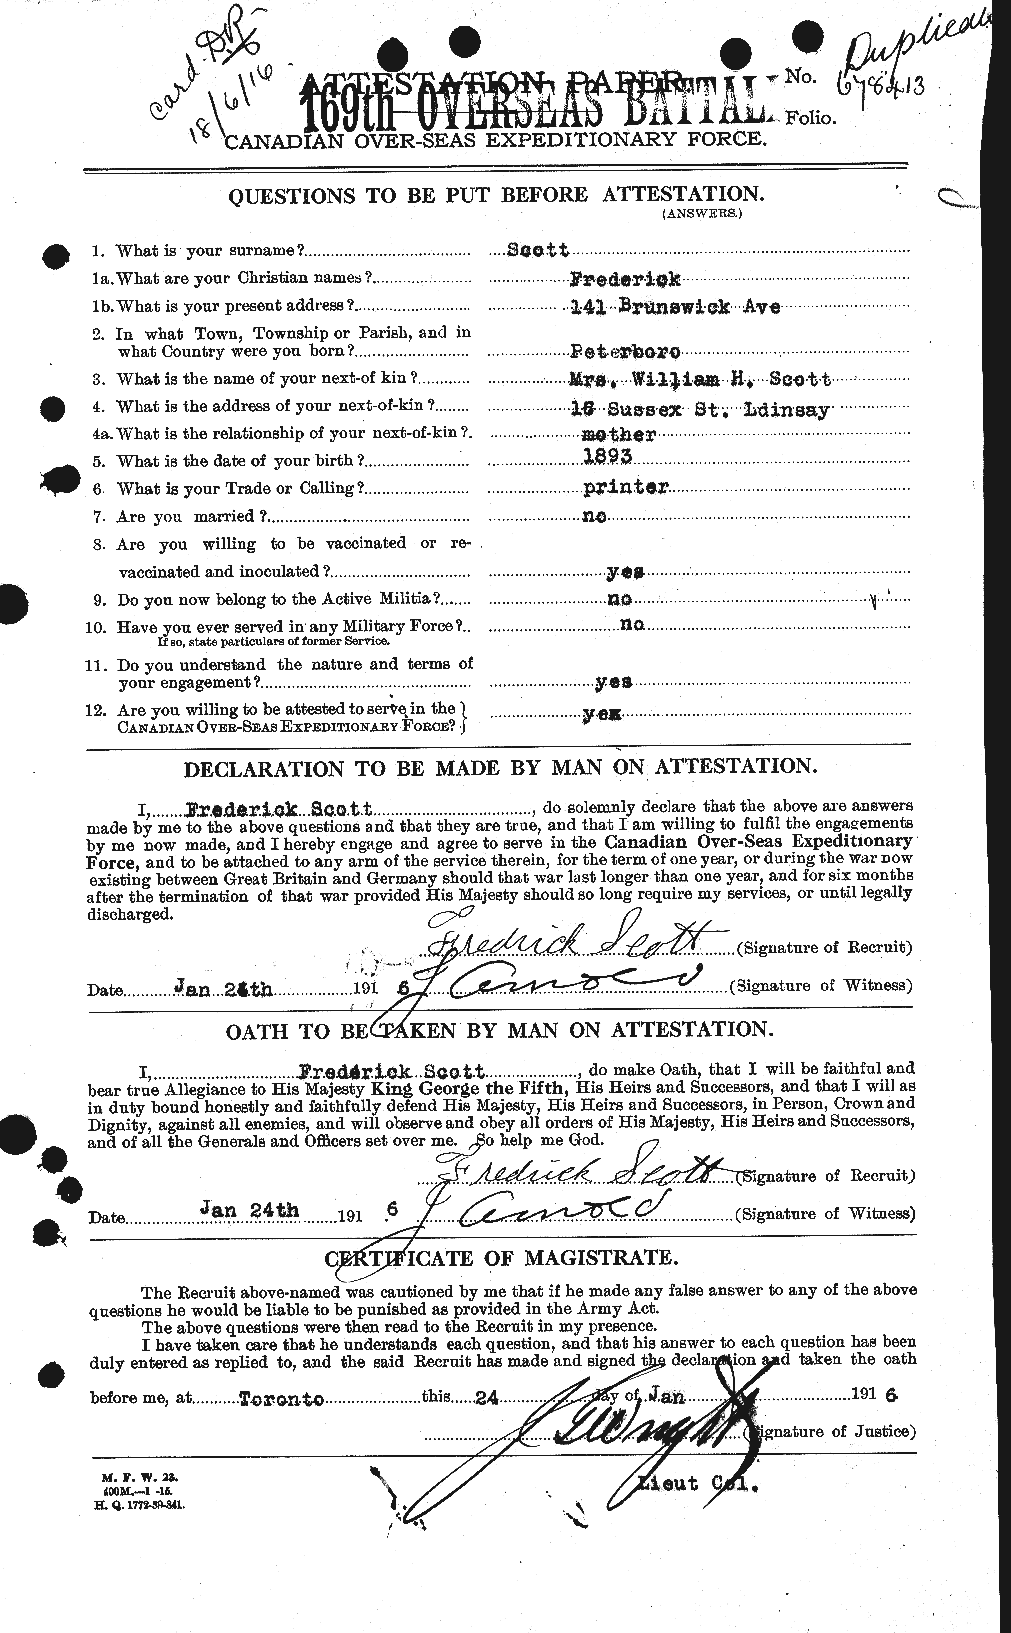 Personnel Records of the First World War - CEF 084399a